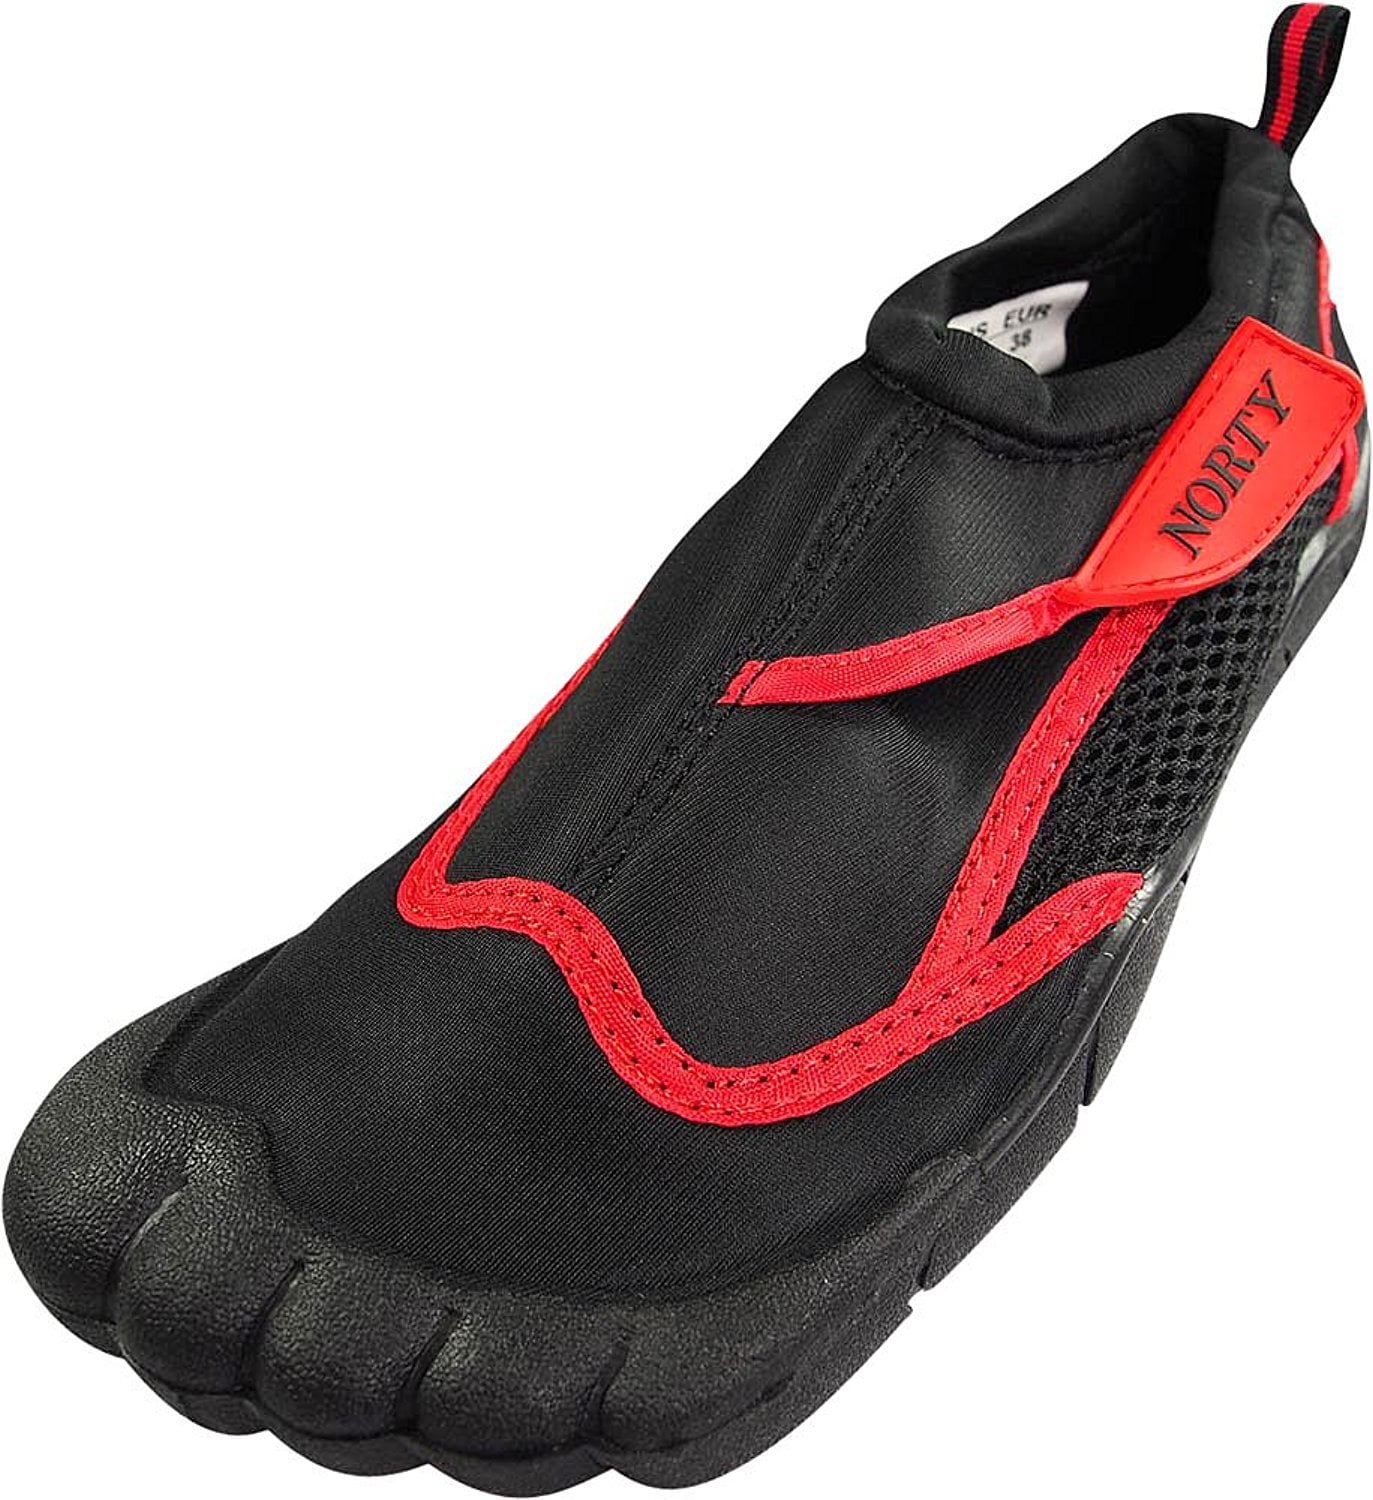 mens water shoes size 1